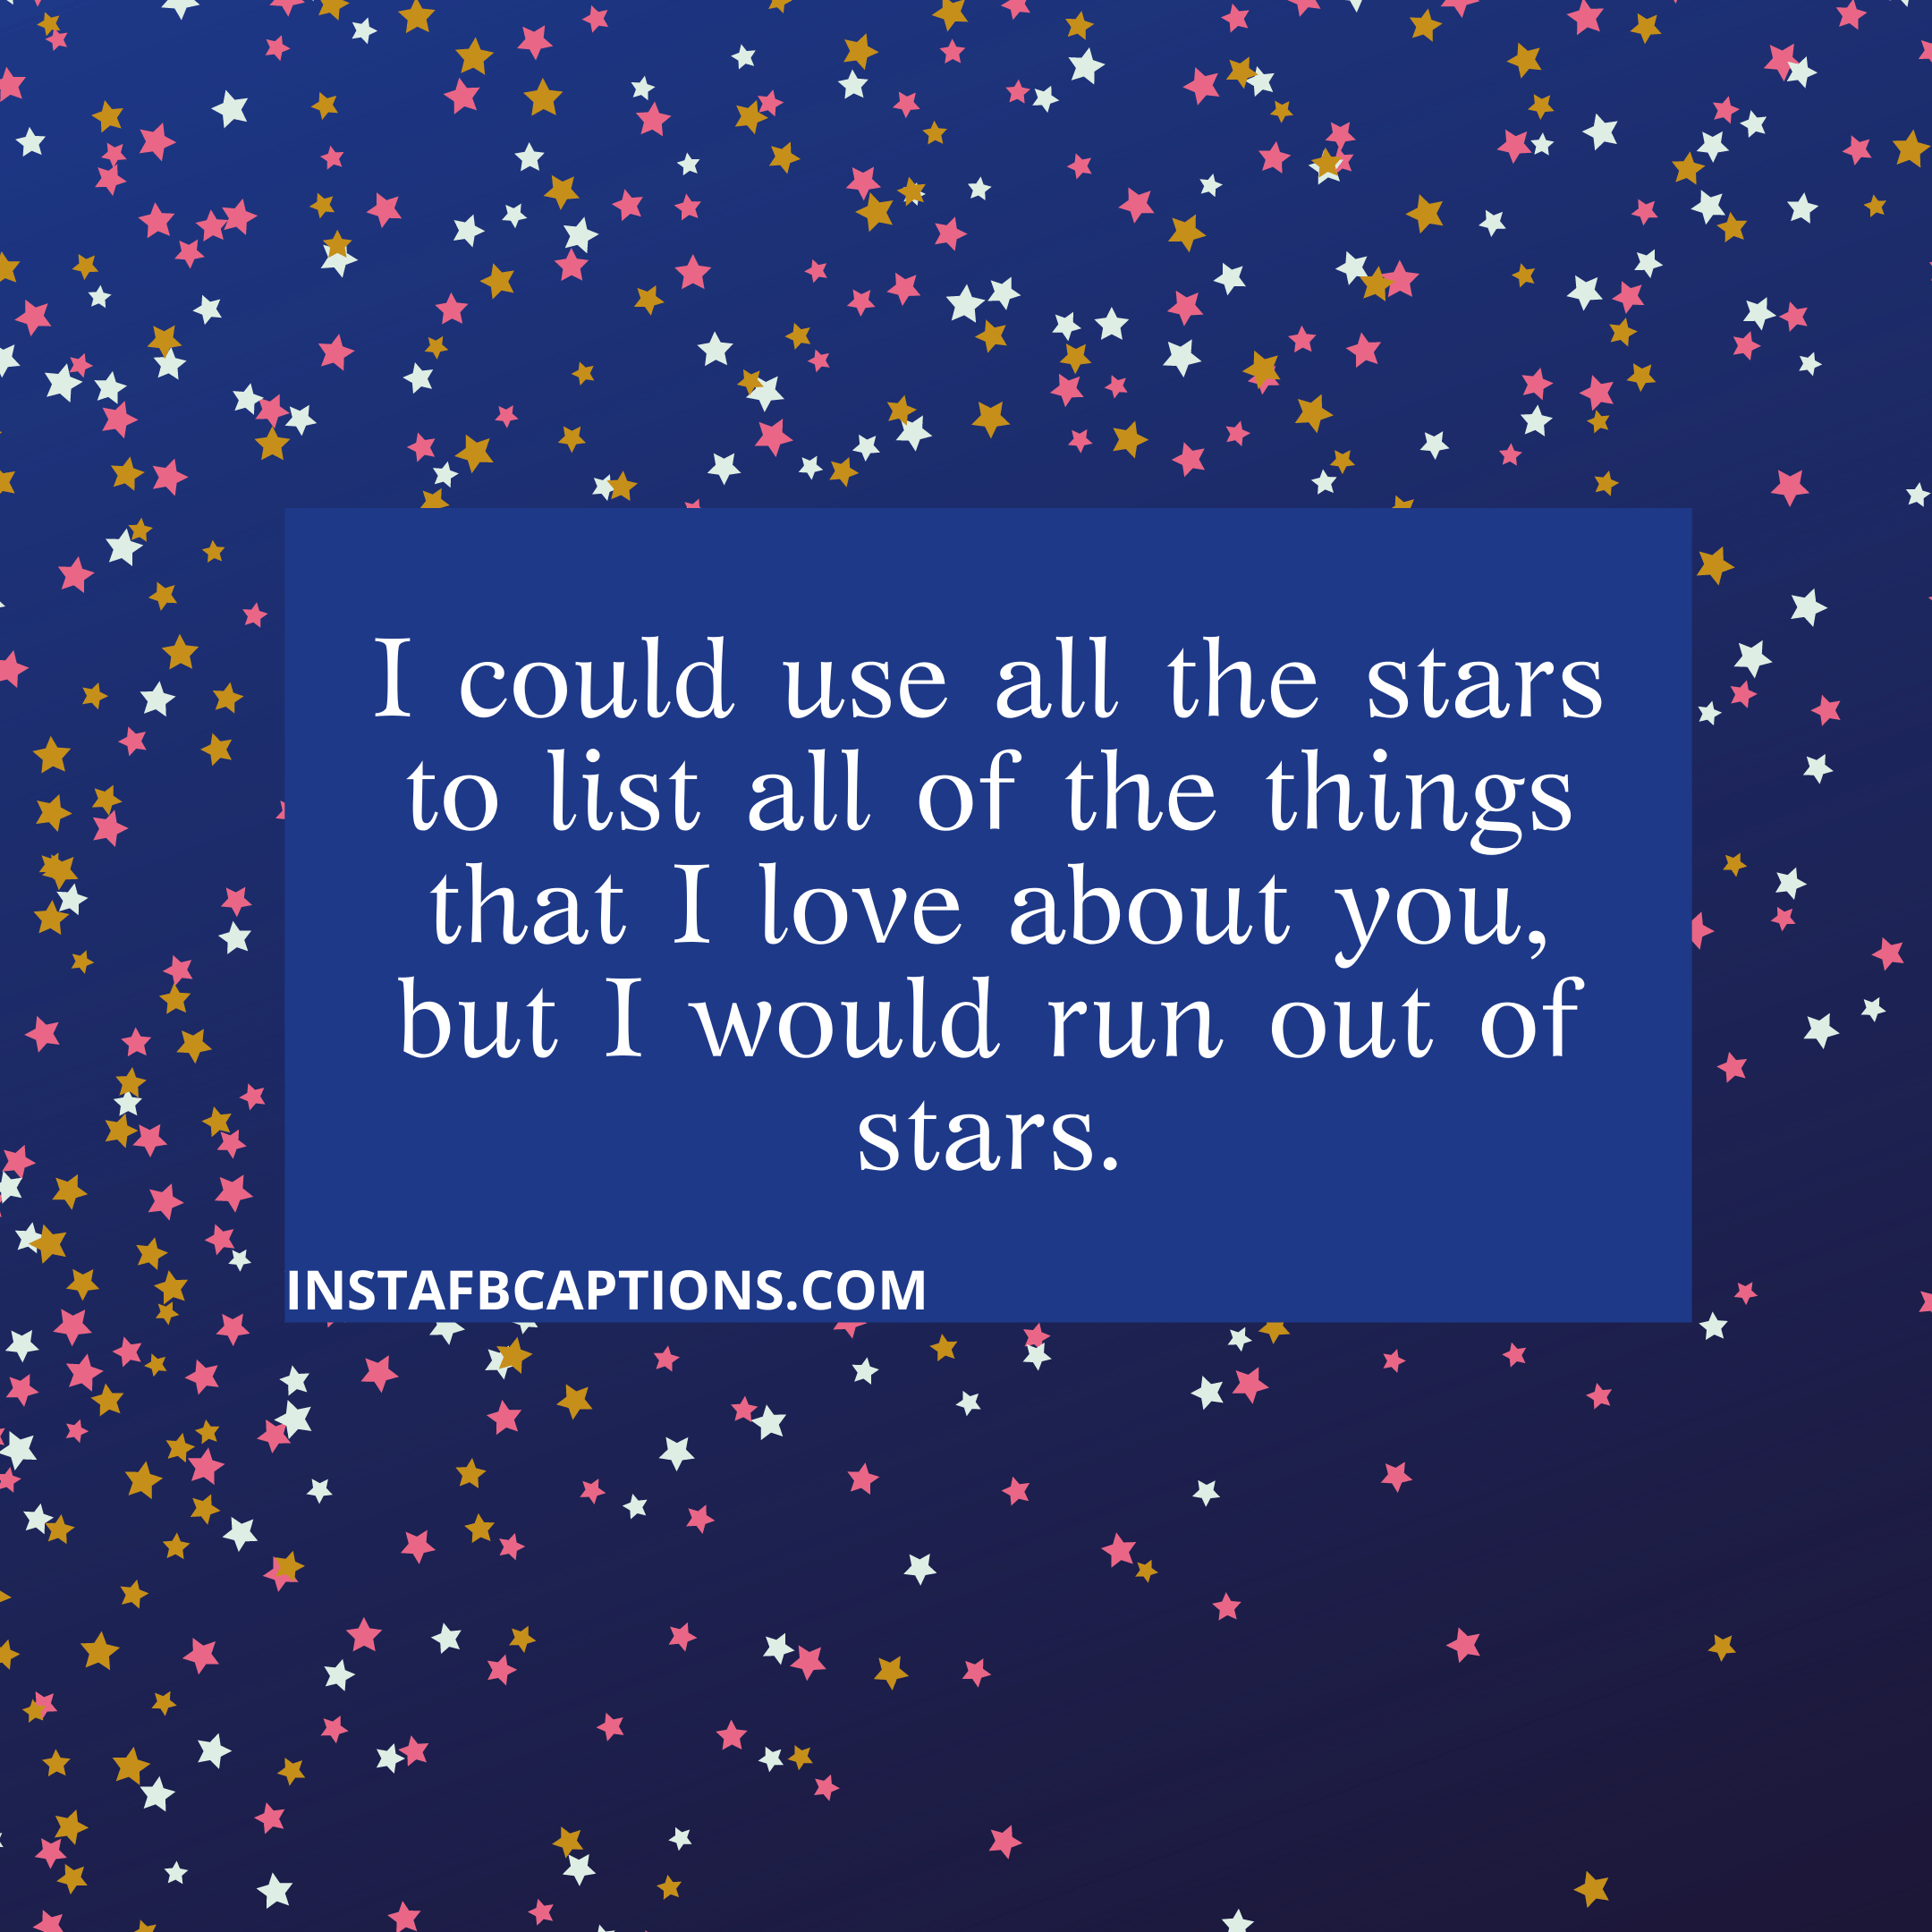 I Could Use All The Stars To List All Of The Things That I Love About You, But I Would Run Out Of Stars  - I could use all the stars to list all of the things that I love about you but I would run out of stars - 200+ COMMENTS For COUPLE PICS on Instagram  2023